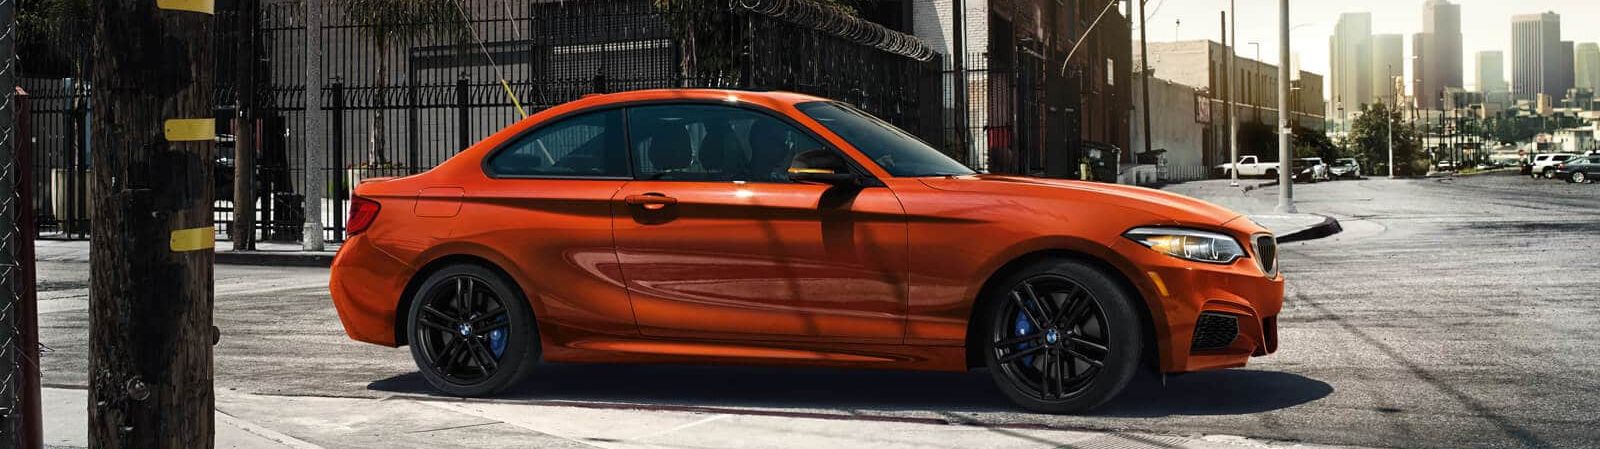 2019 Bmw 2 Series For Sale In Jackson Ms